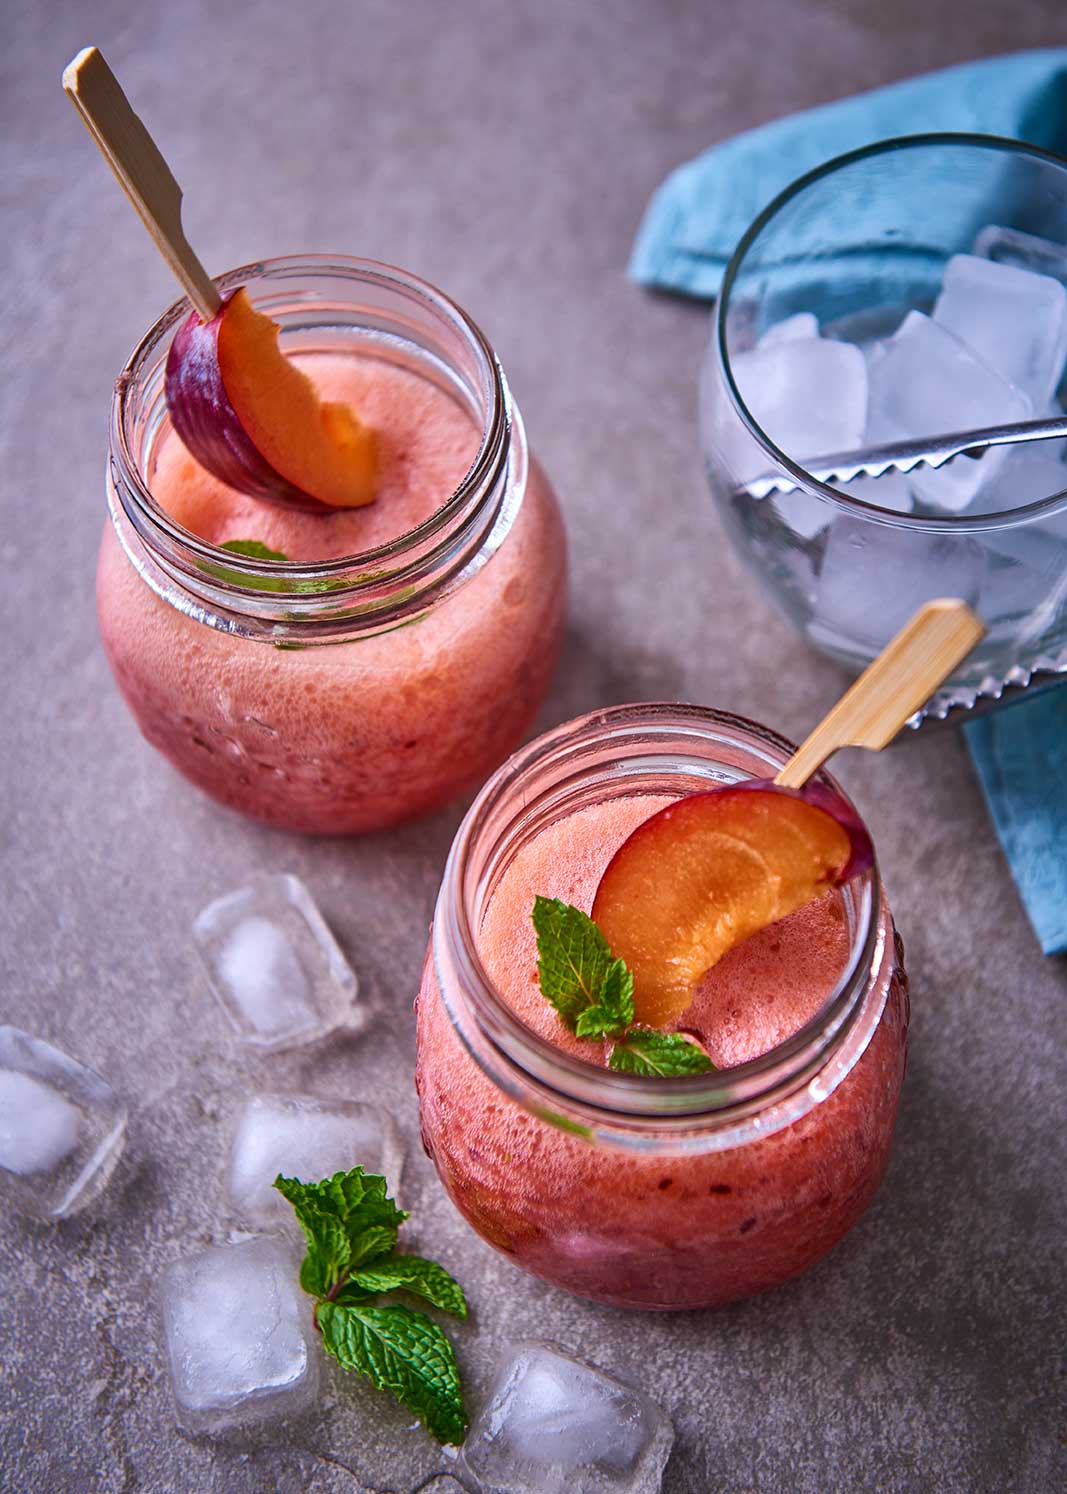 5 minutes to make this quick and easy peach cocktail recipe